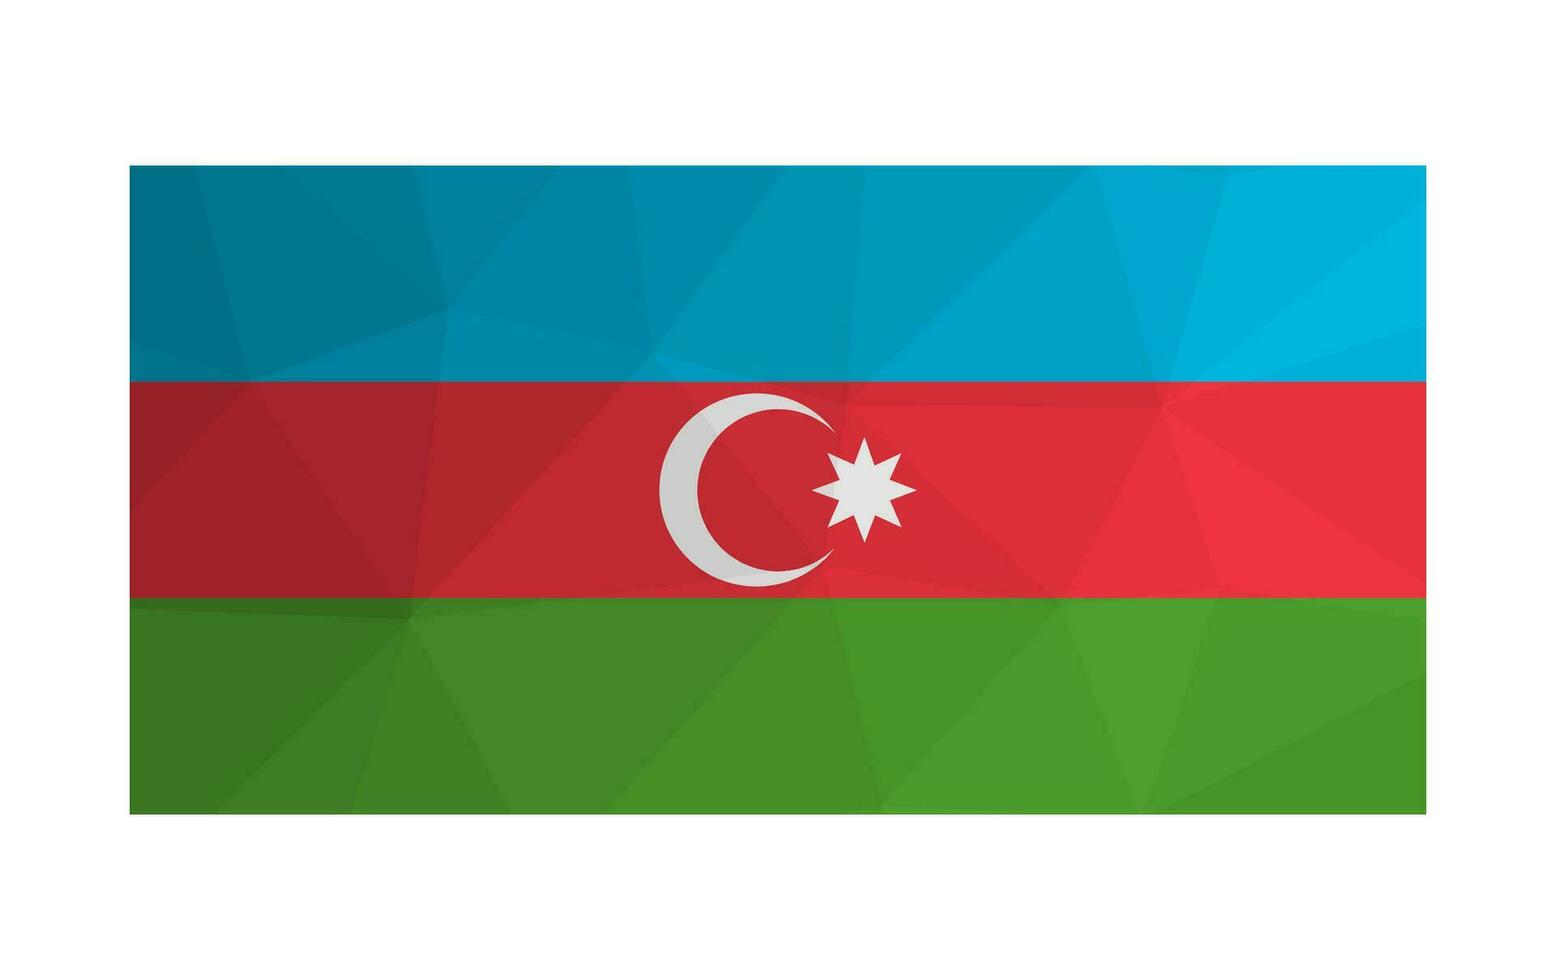 Vector illustration. National tricolour flag with band of blue, red, green and white crescent and eight pointed star. Official symbol of Azerbaijan. Design in low poly style with triangular shapes.